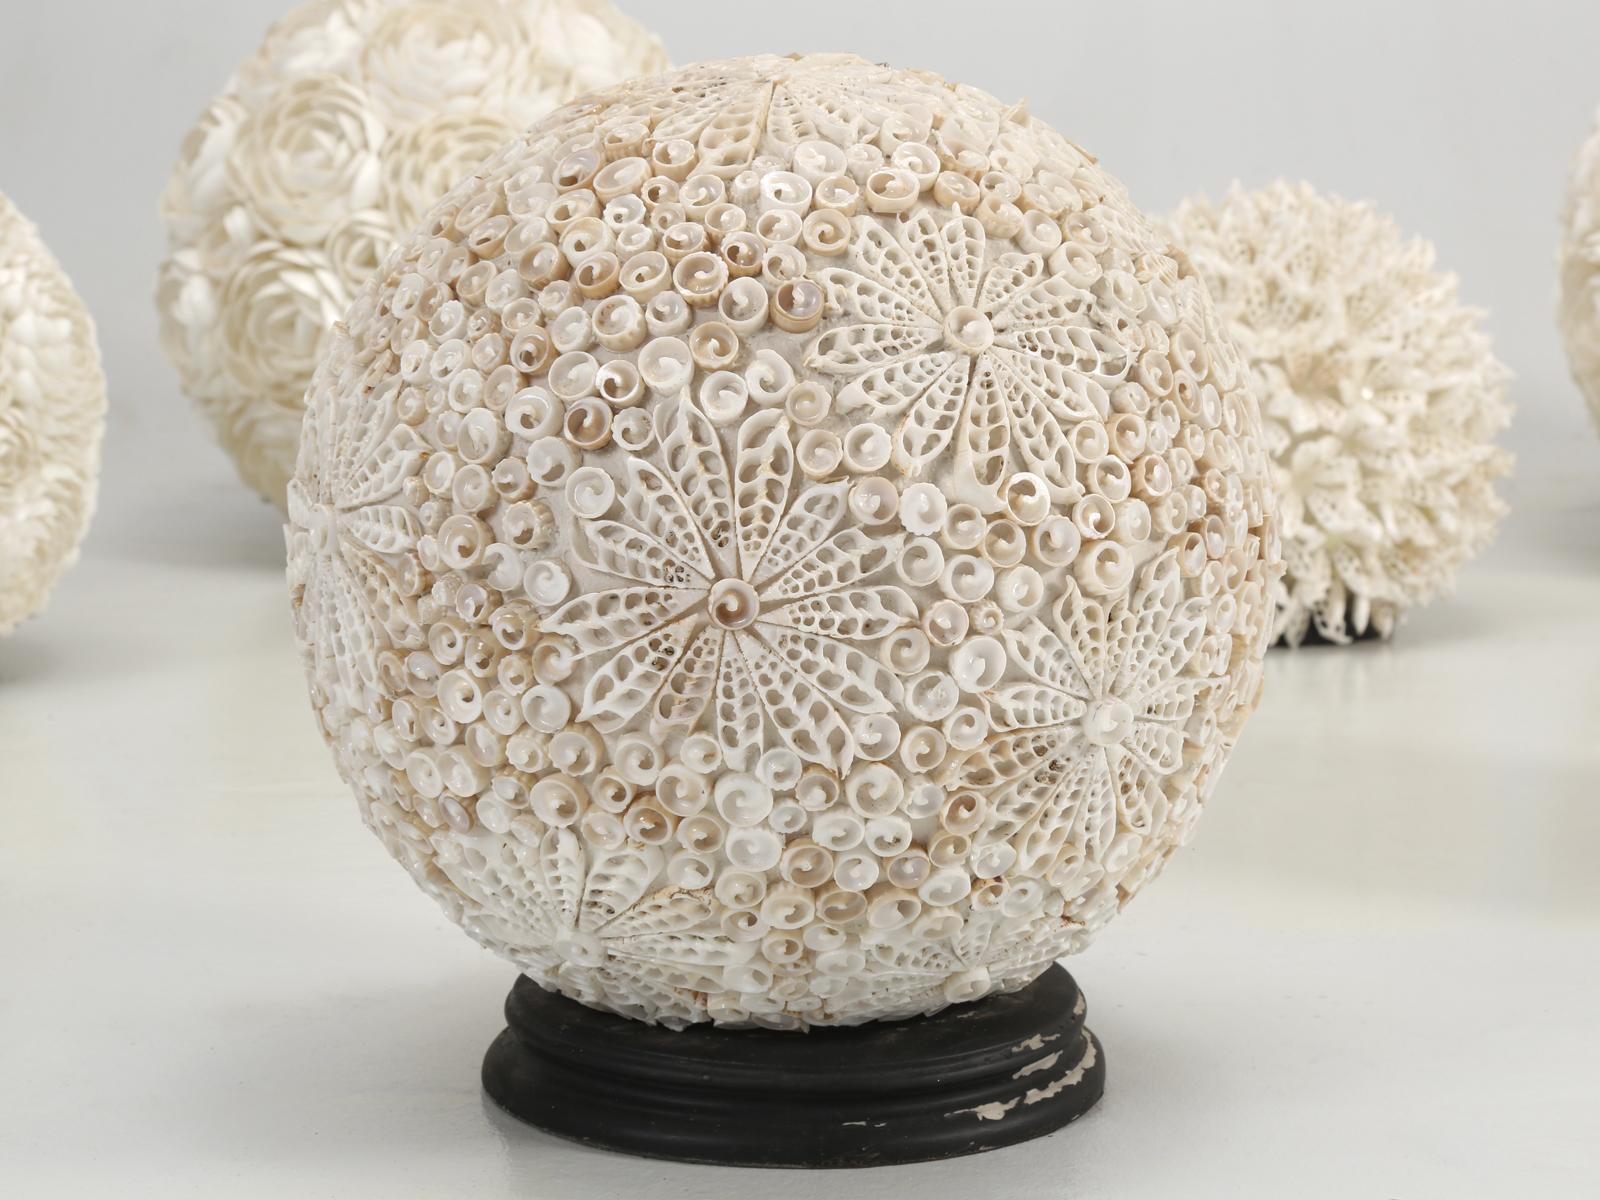 Collection of seashell encrusted spheres, which I believe are made out of fiberglass. Although we purchased this grouping, of (7) seashell lights a number of years ago in France, I am assuming that the seashells are from the South Pacific. The